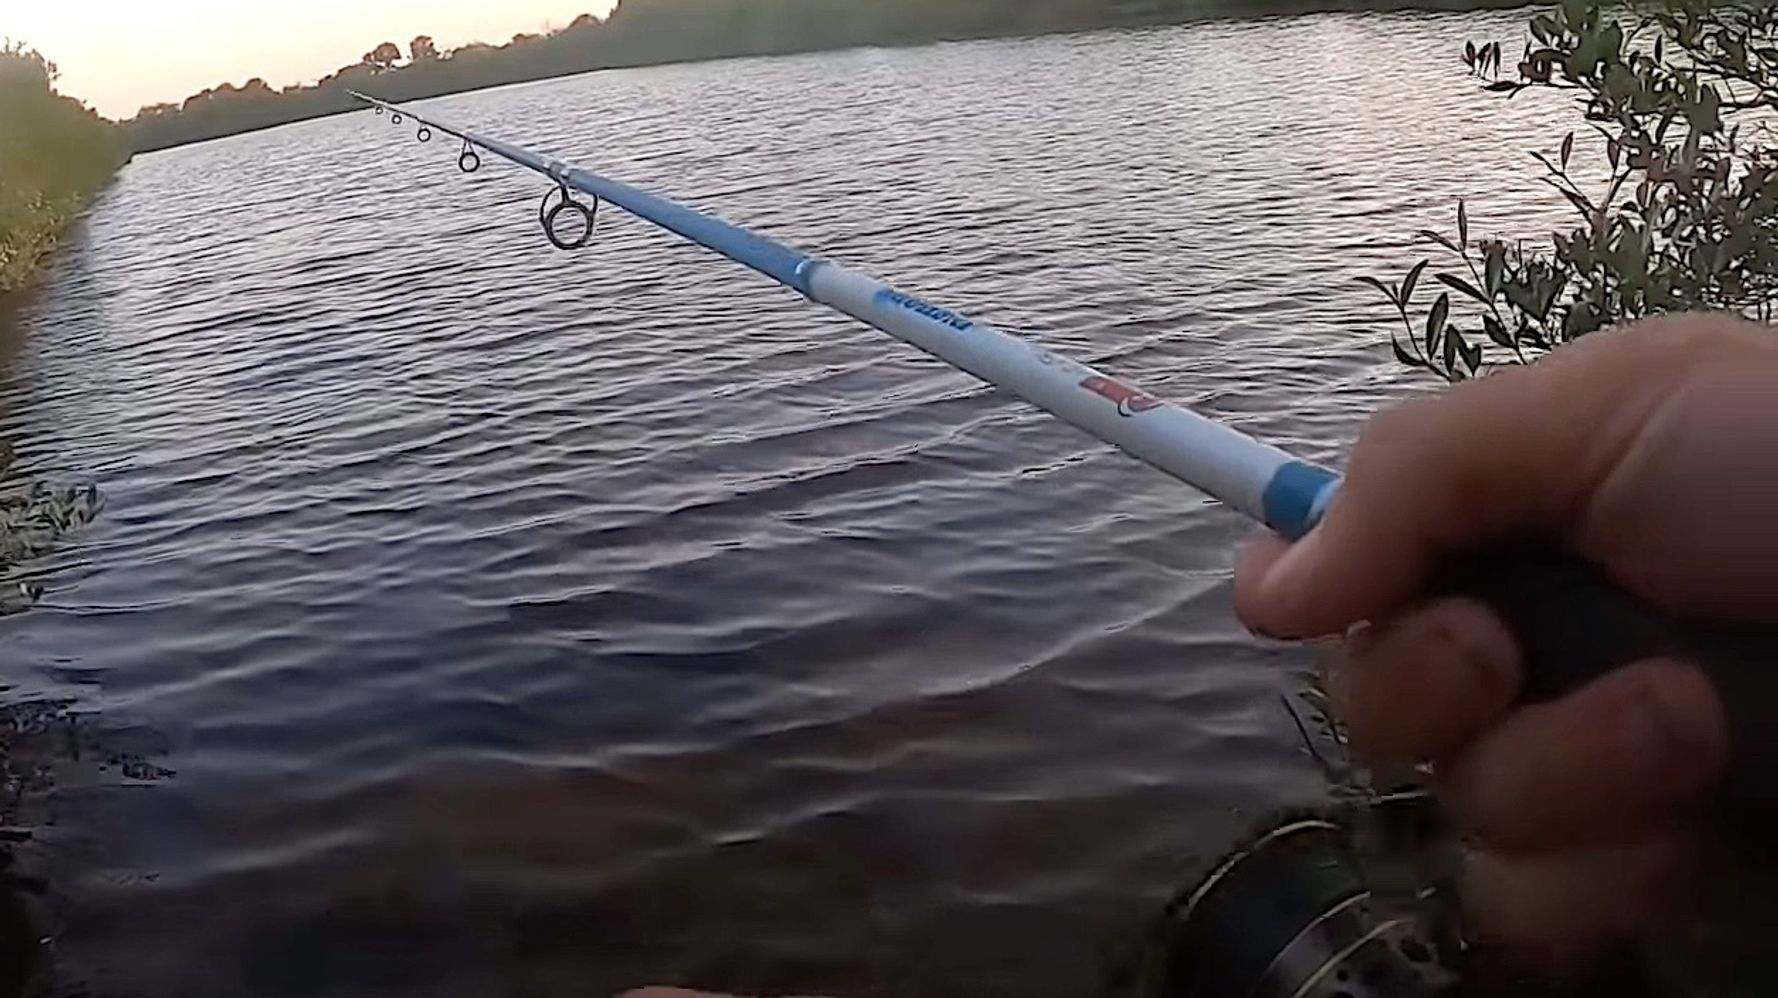 Fisherman Quits On The Spot When An Absolute Nightmare Emerges From The Water